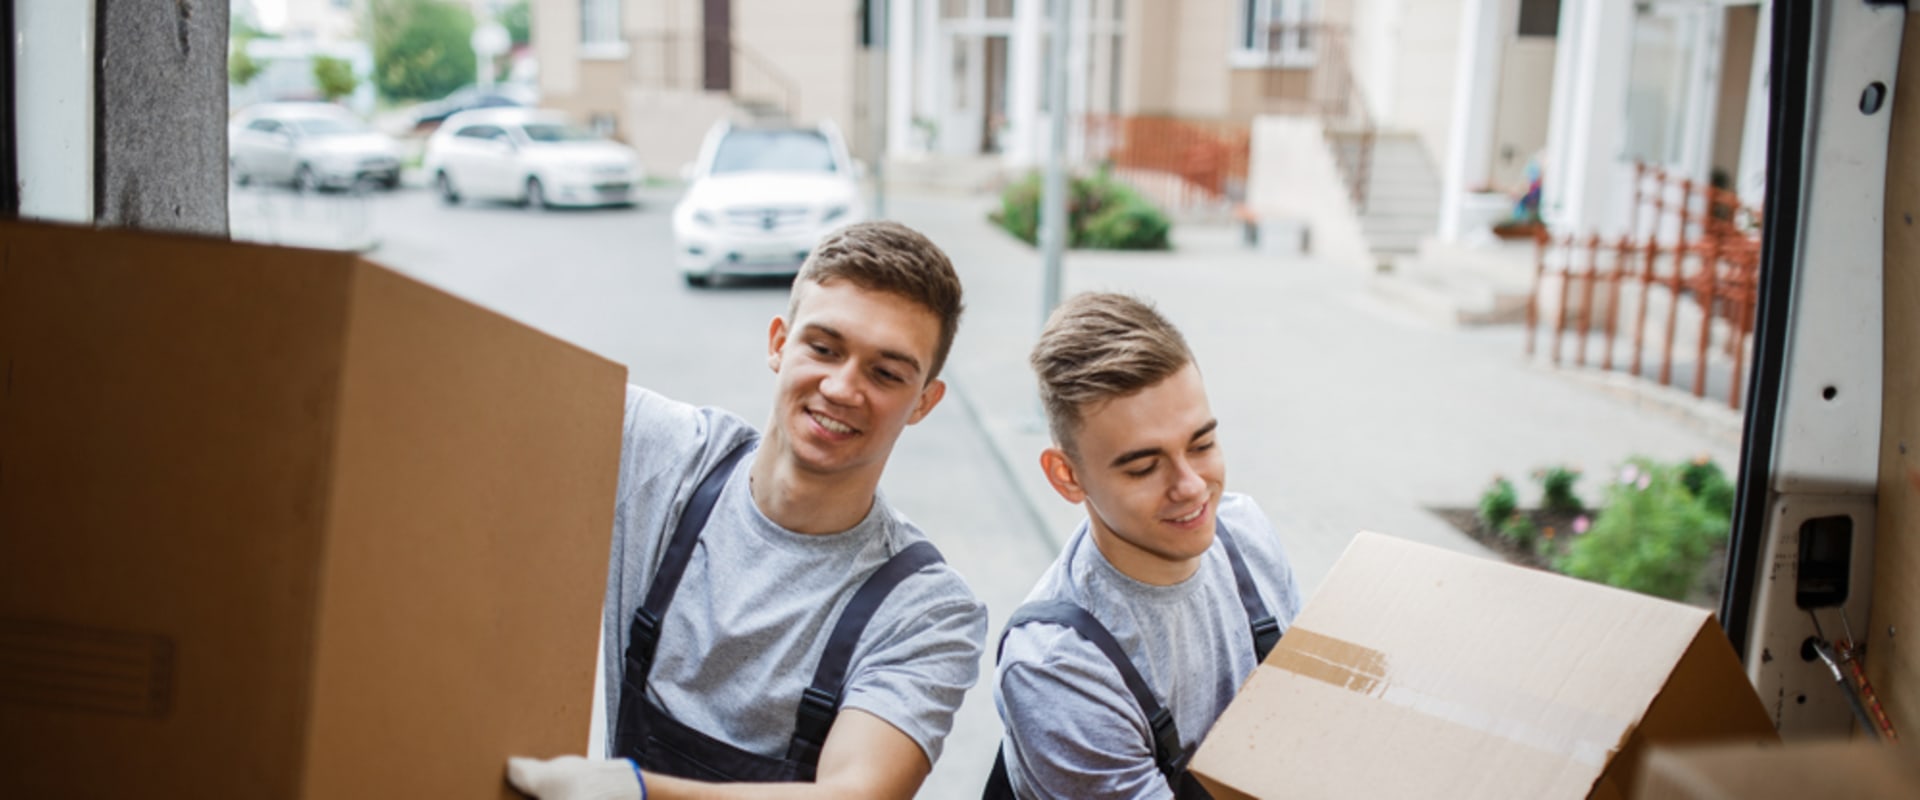 The Benefits Of Hiring A Professional Local Moving Company In Vero Beach